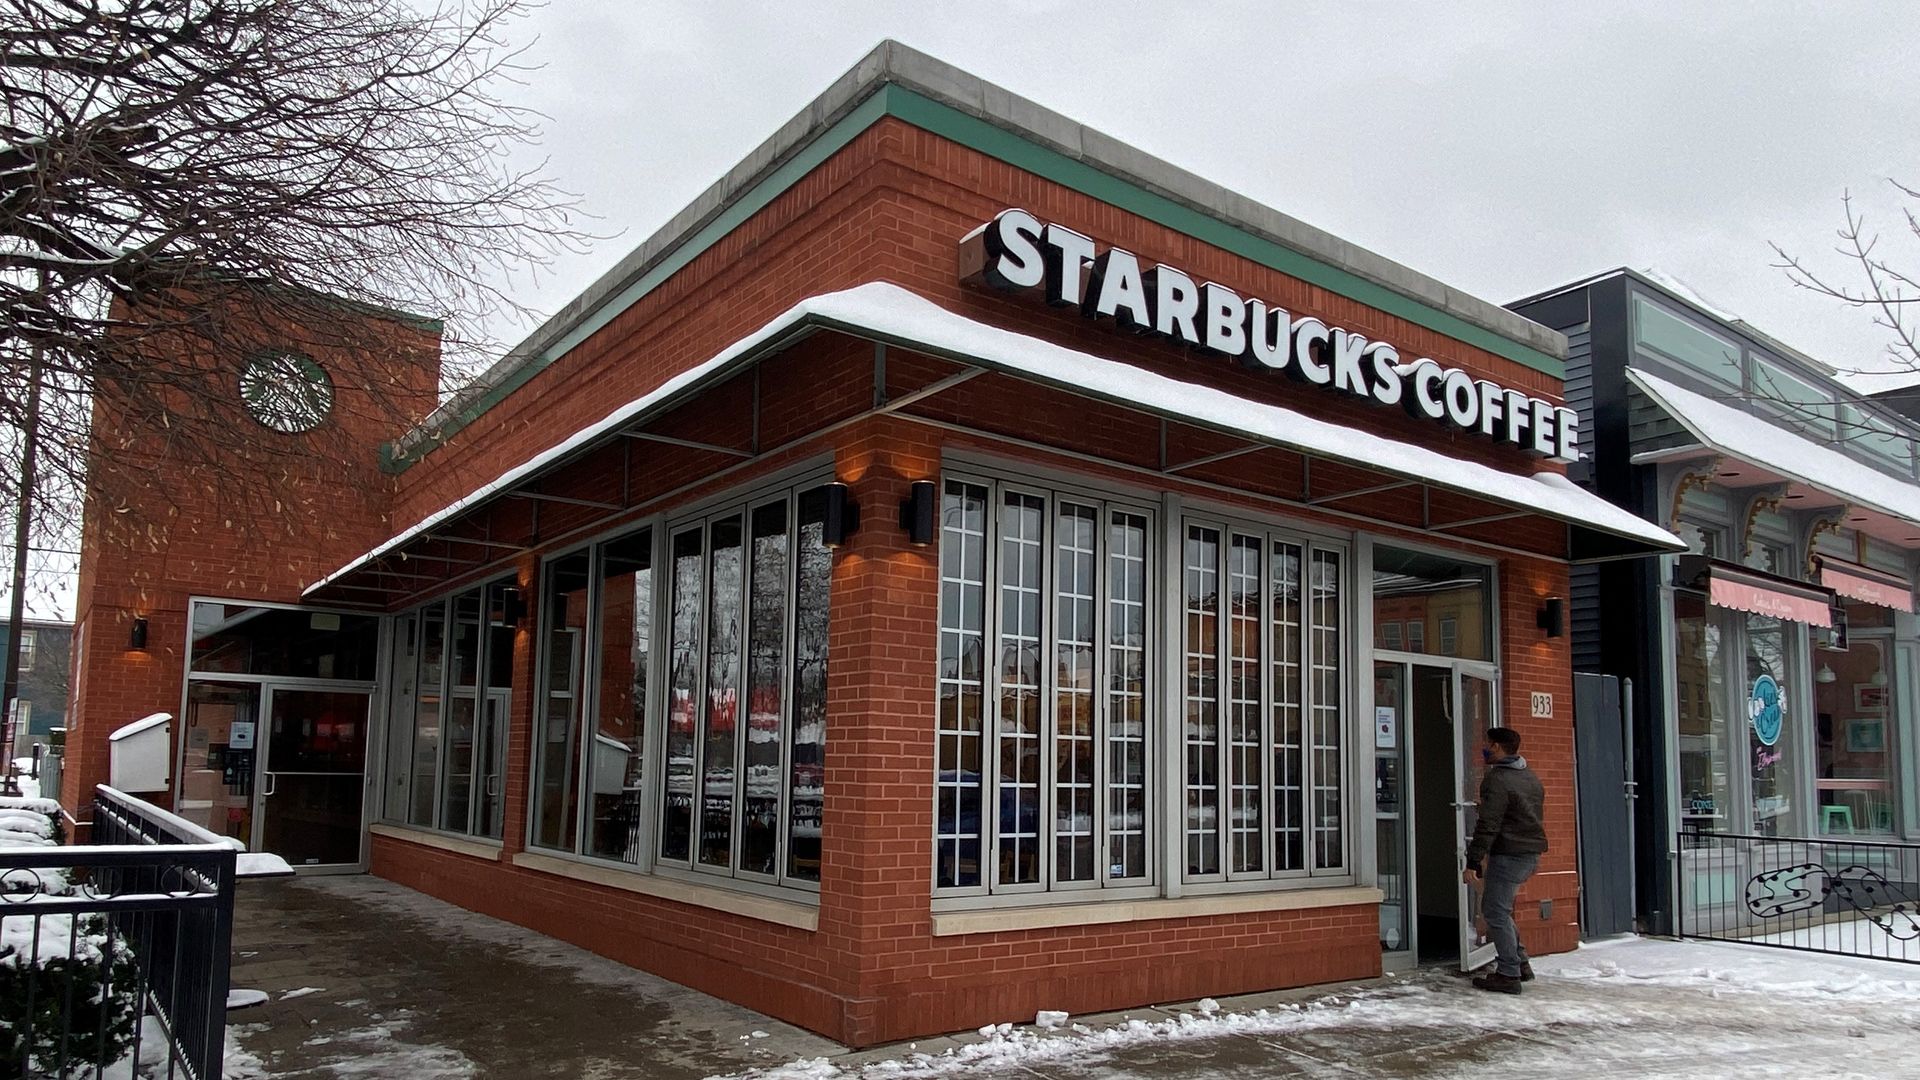 Photo of a Starbucks store built from red brick, with snow on the ground